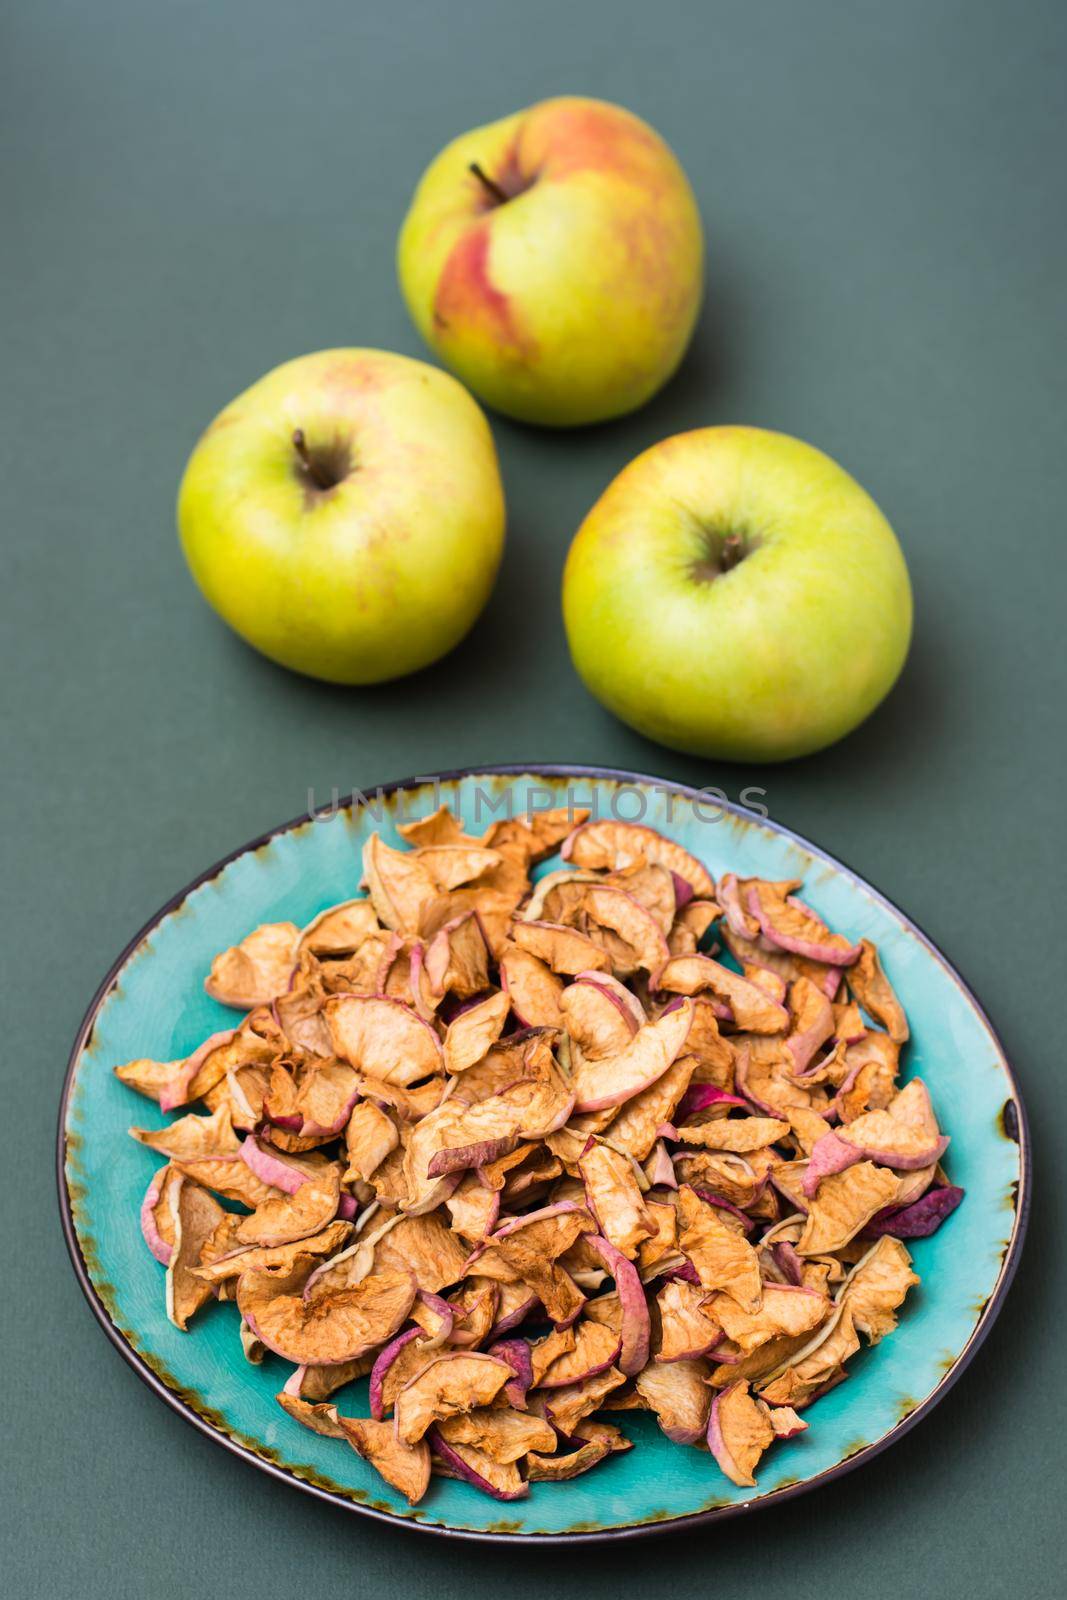 Slices of dry apples on a plate and fresh apples on a green background. Healthy eating. Vertical view by Aleruana